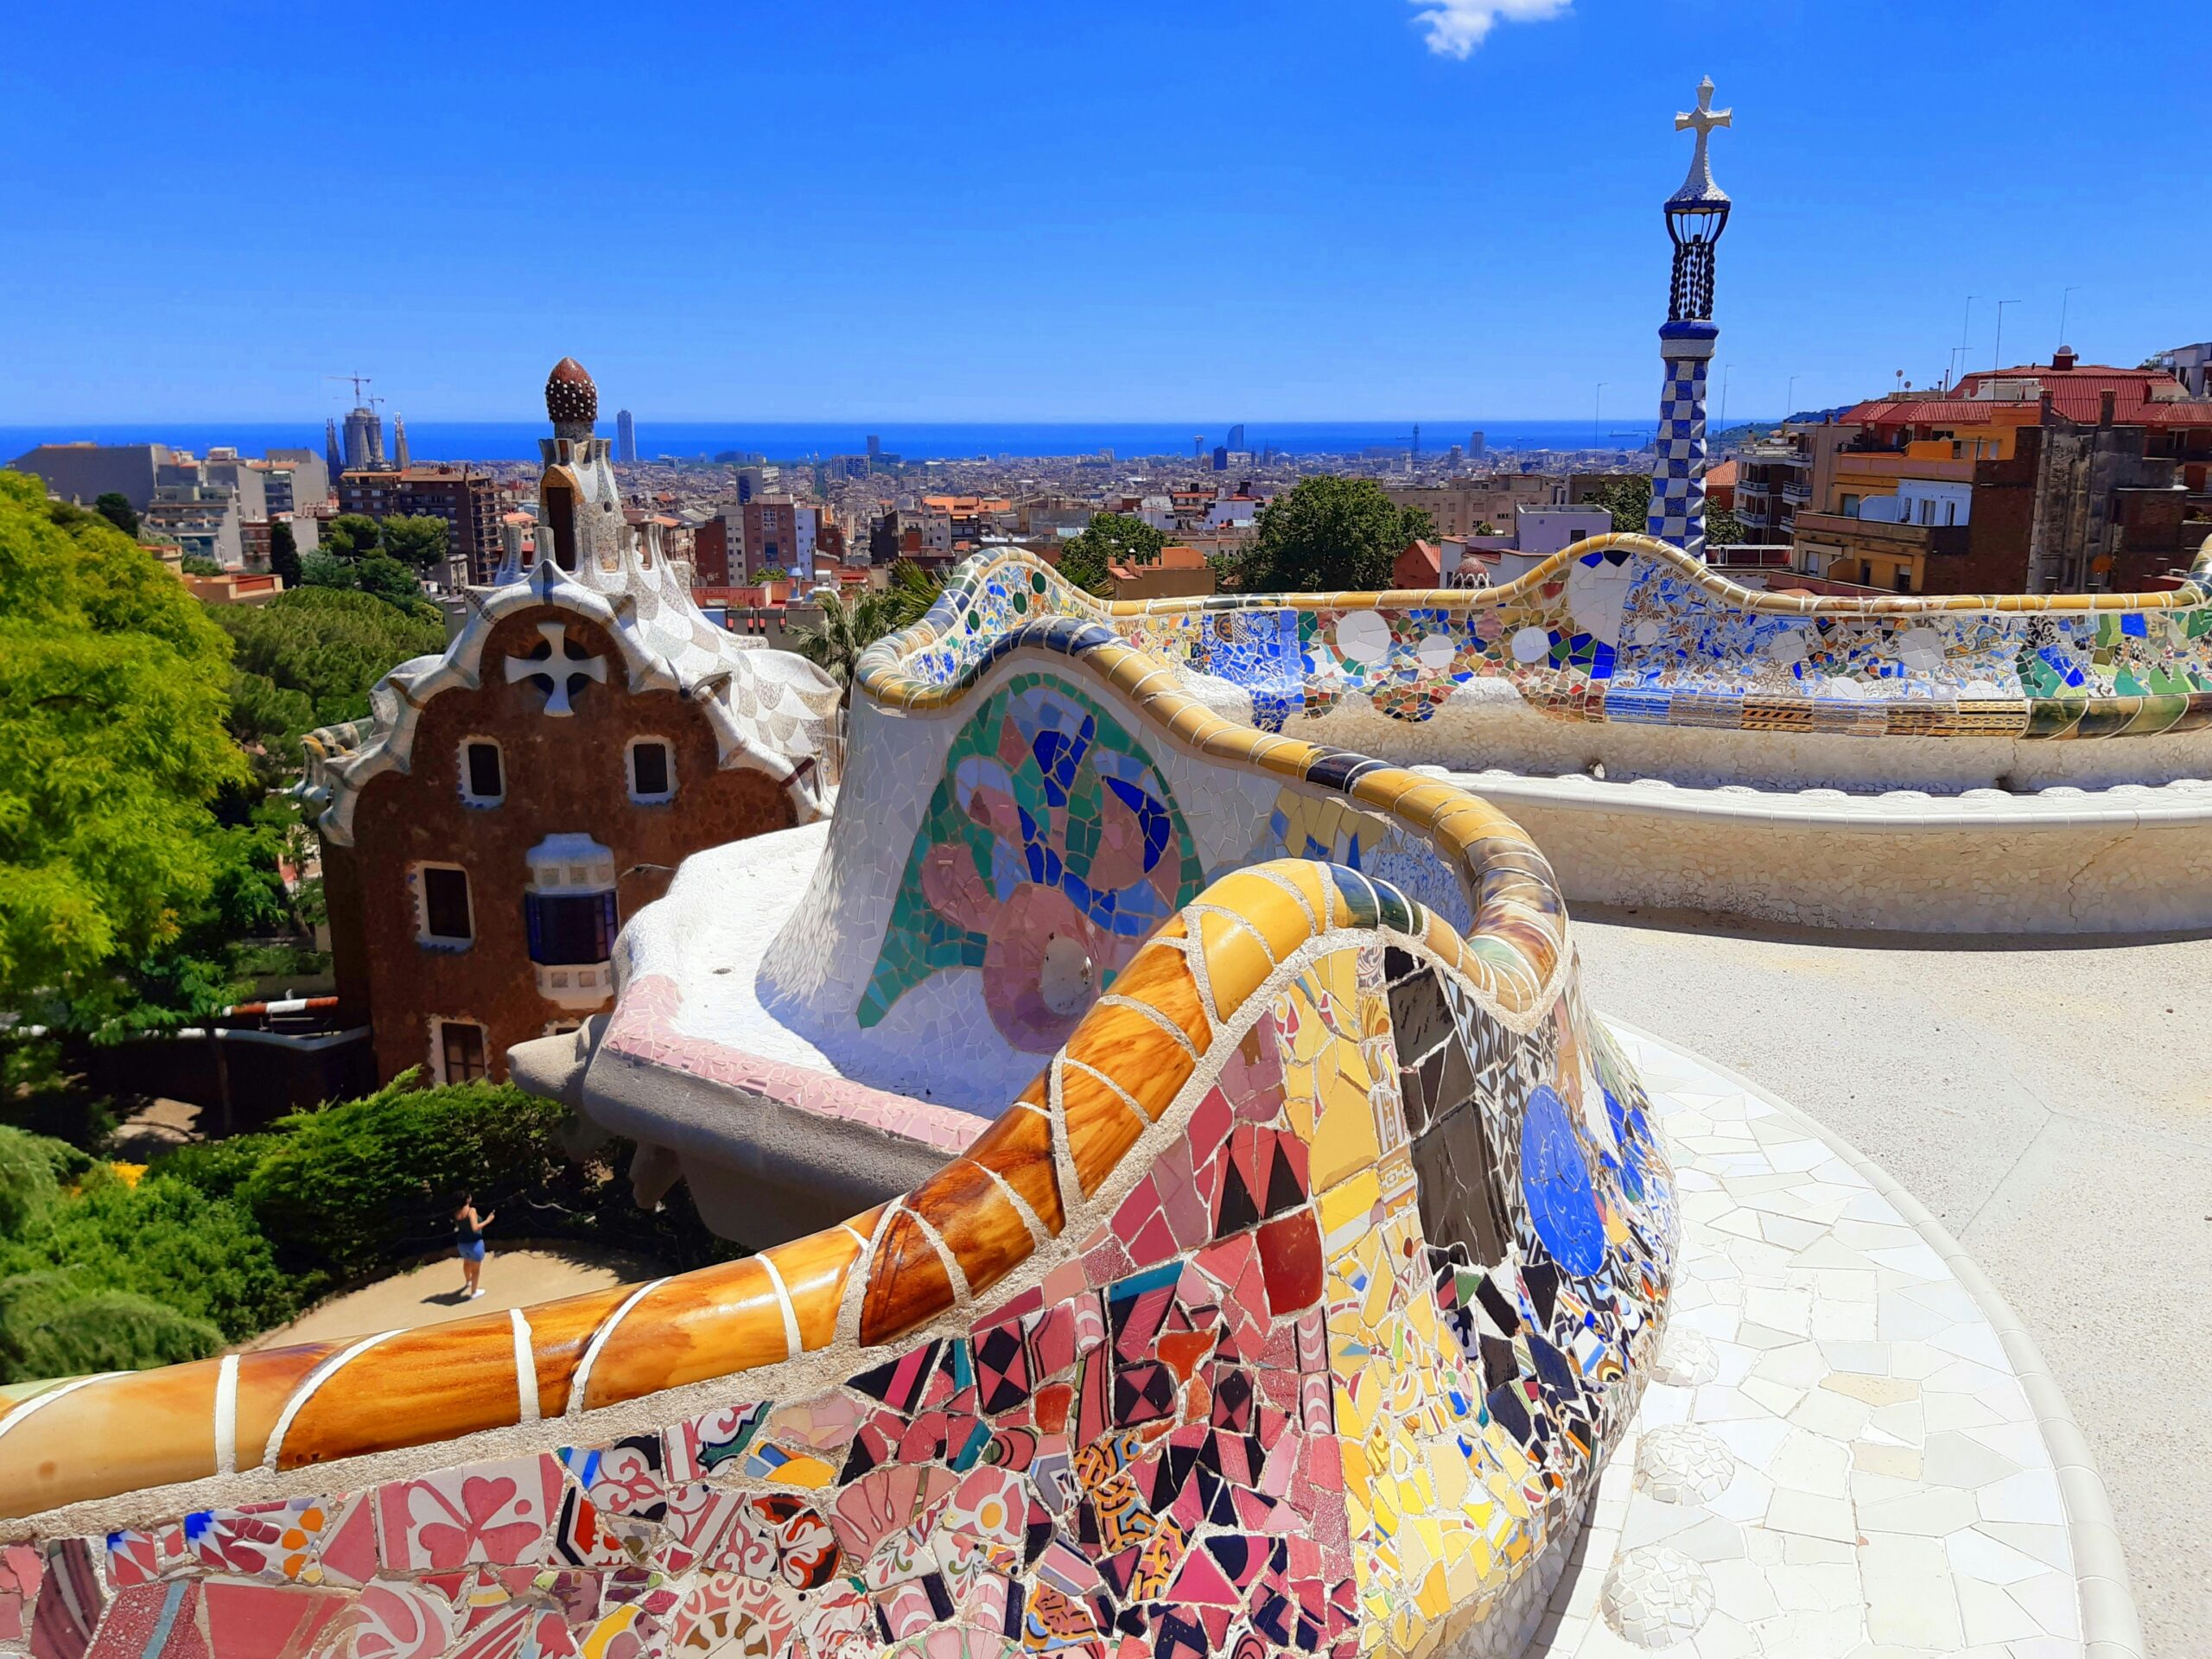 Barcelona is a historic city in Spain. It is one of the best cities to visit in Europe. 
Pictured: the vibrant walls of Barcelona overlooking the cityscape with lush greenery